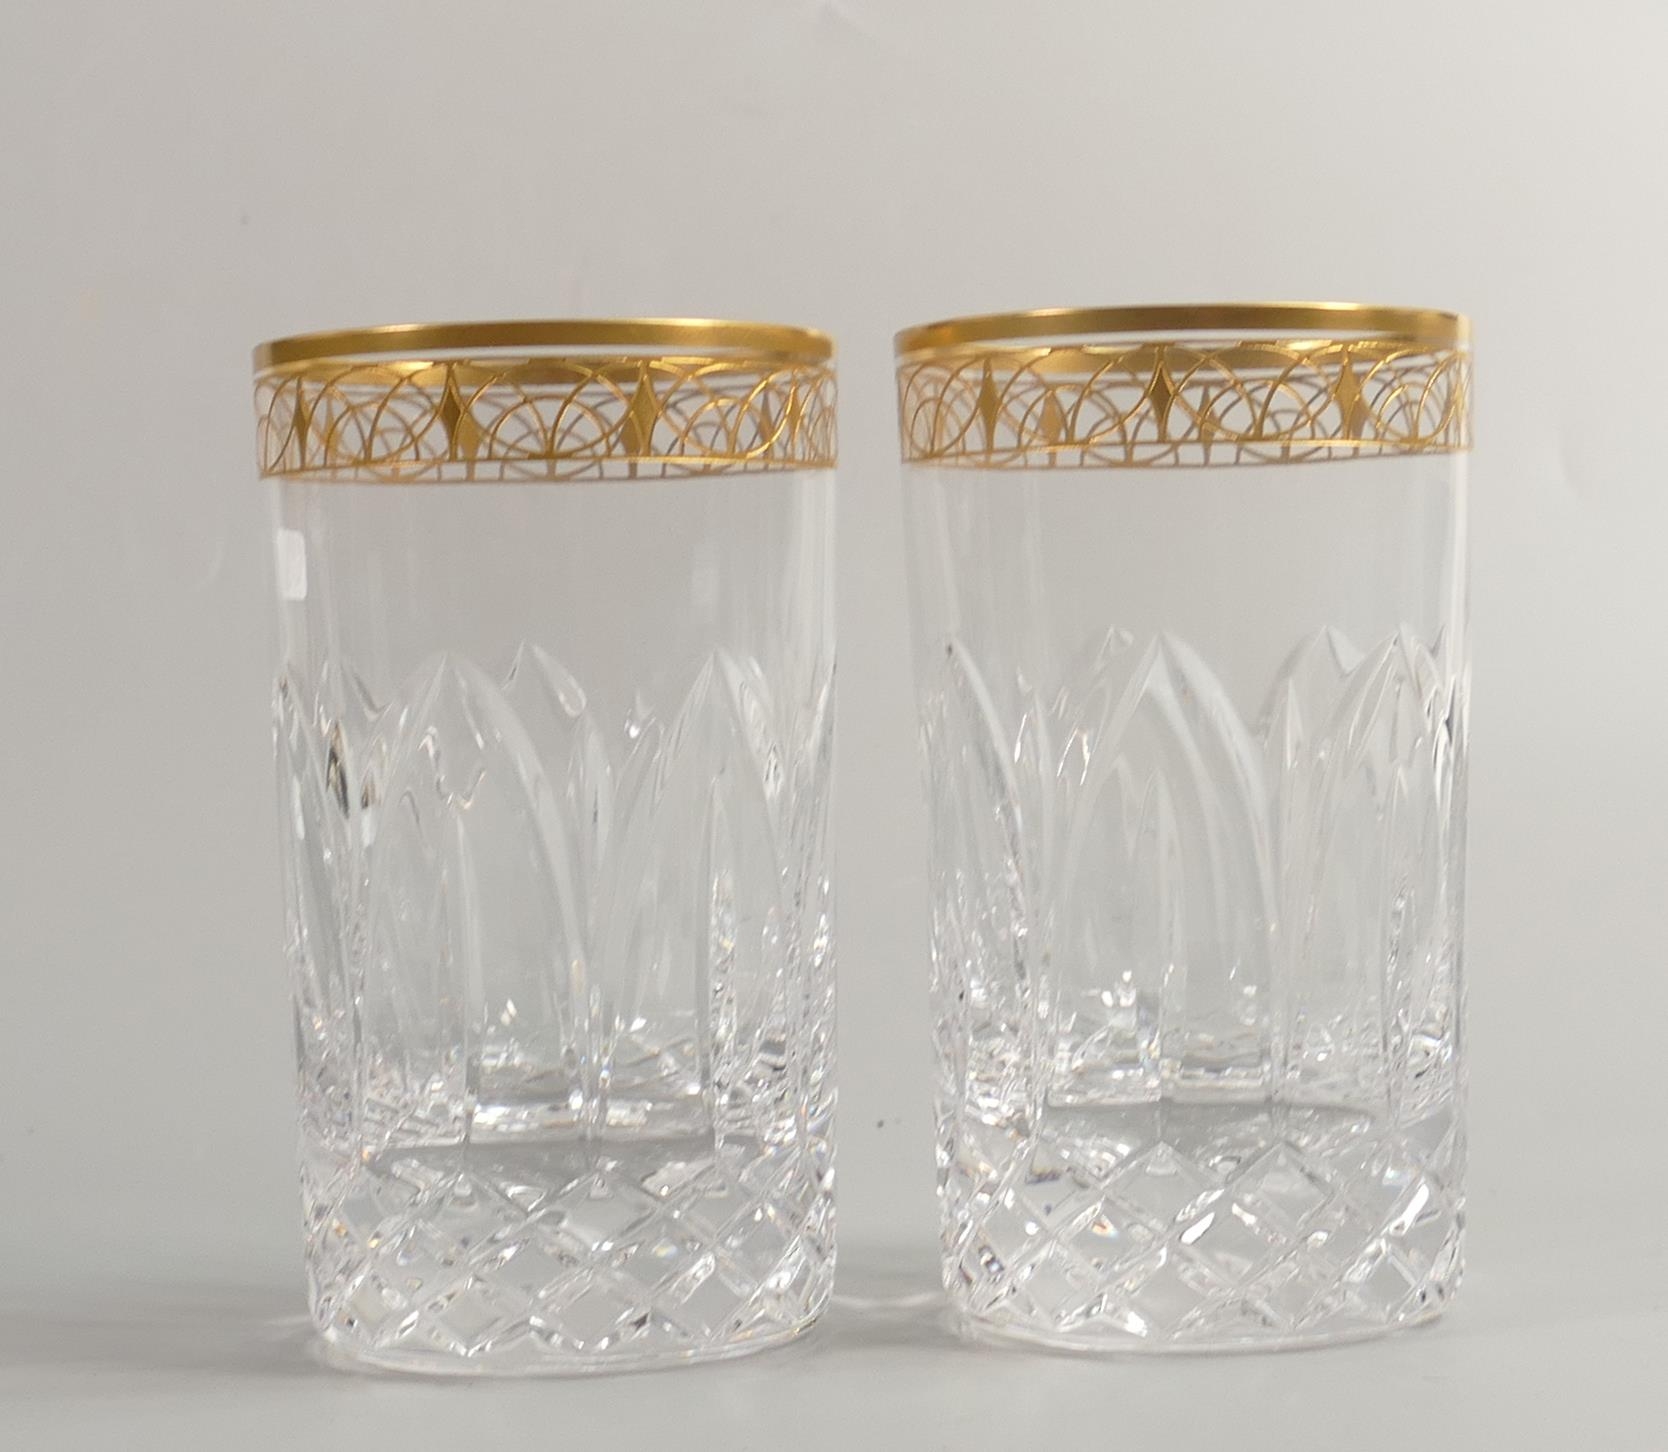 De Lamerie Fine Bone China Glass Crystal Trellis Patterned heavily gilded Tumblers, Made in England,